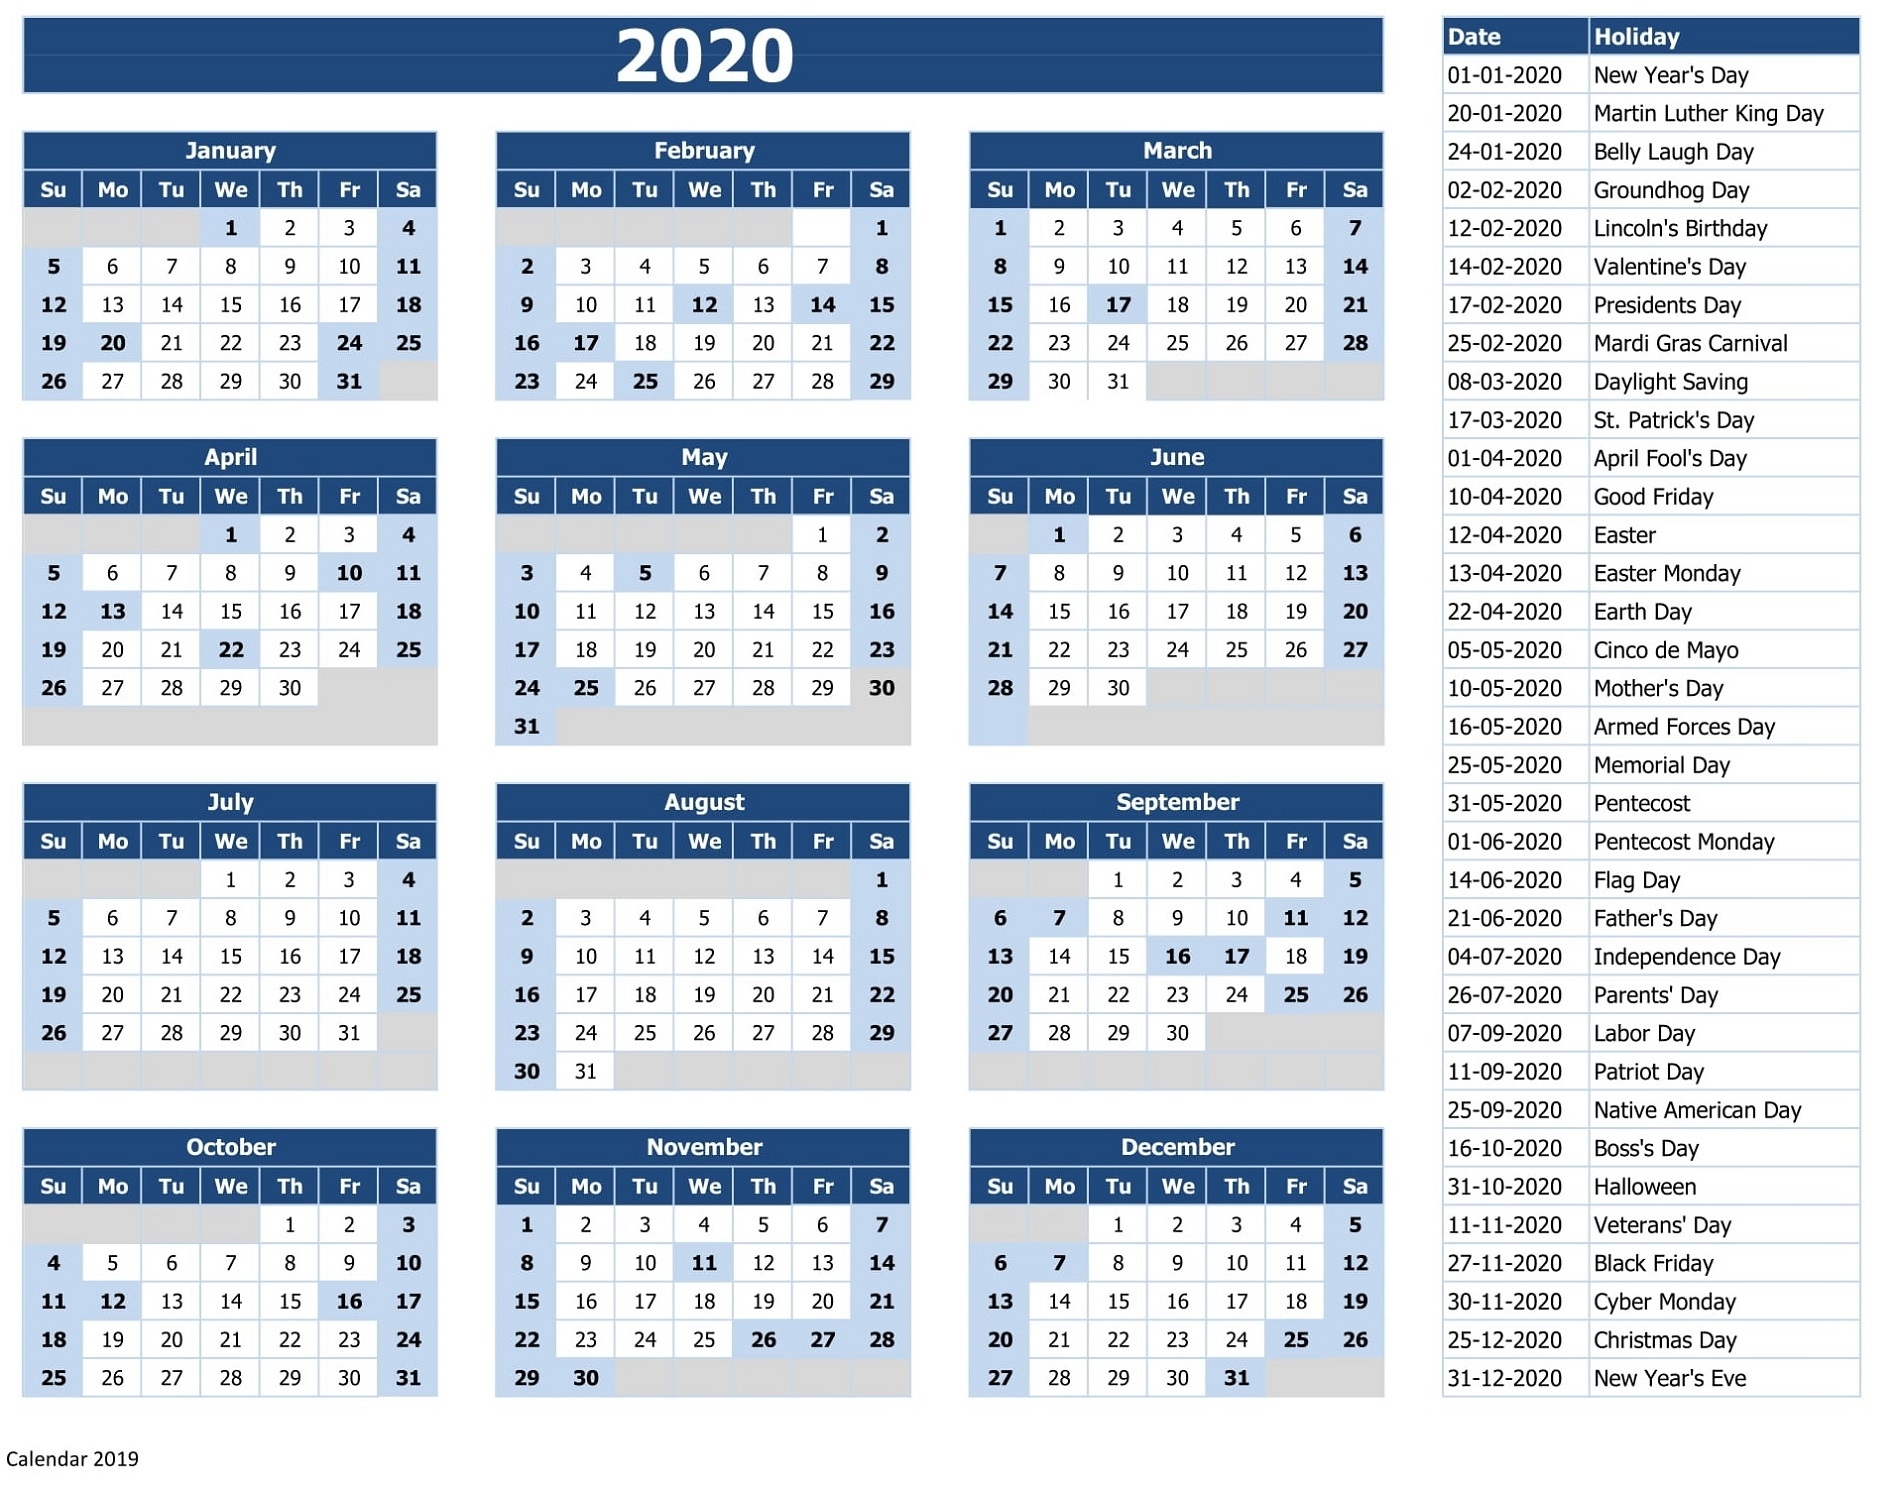 2020 Calendar Printable With Holidays And Notes | Calendar Dashing Calendar Showing Holidays For 2020